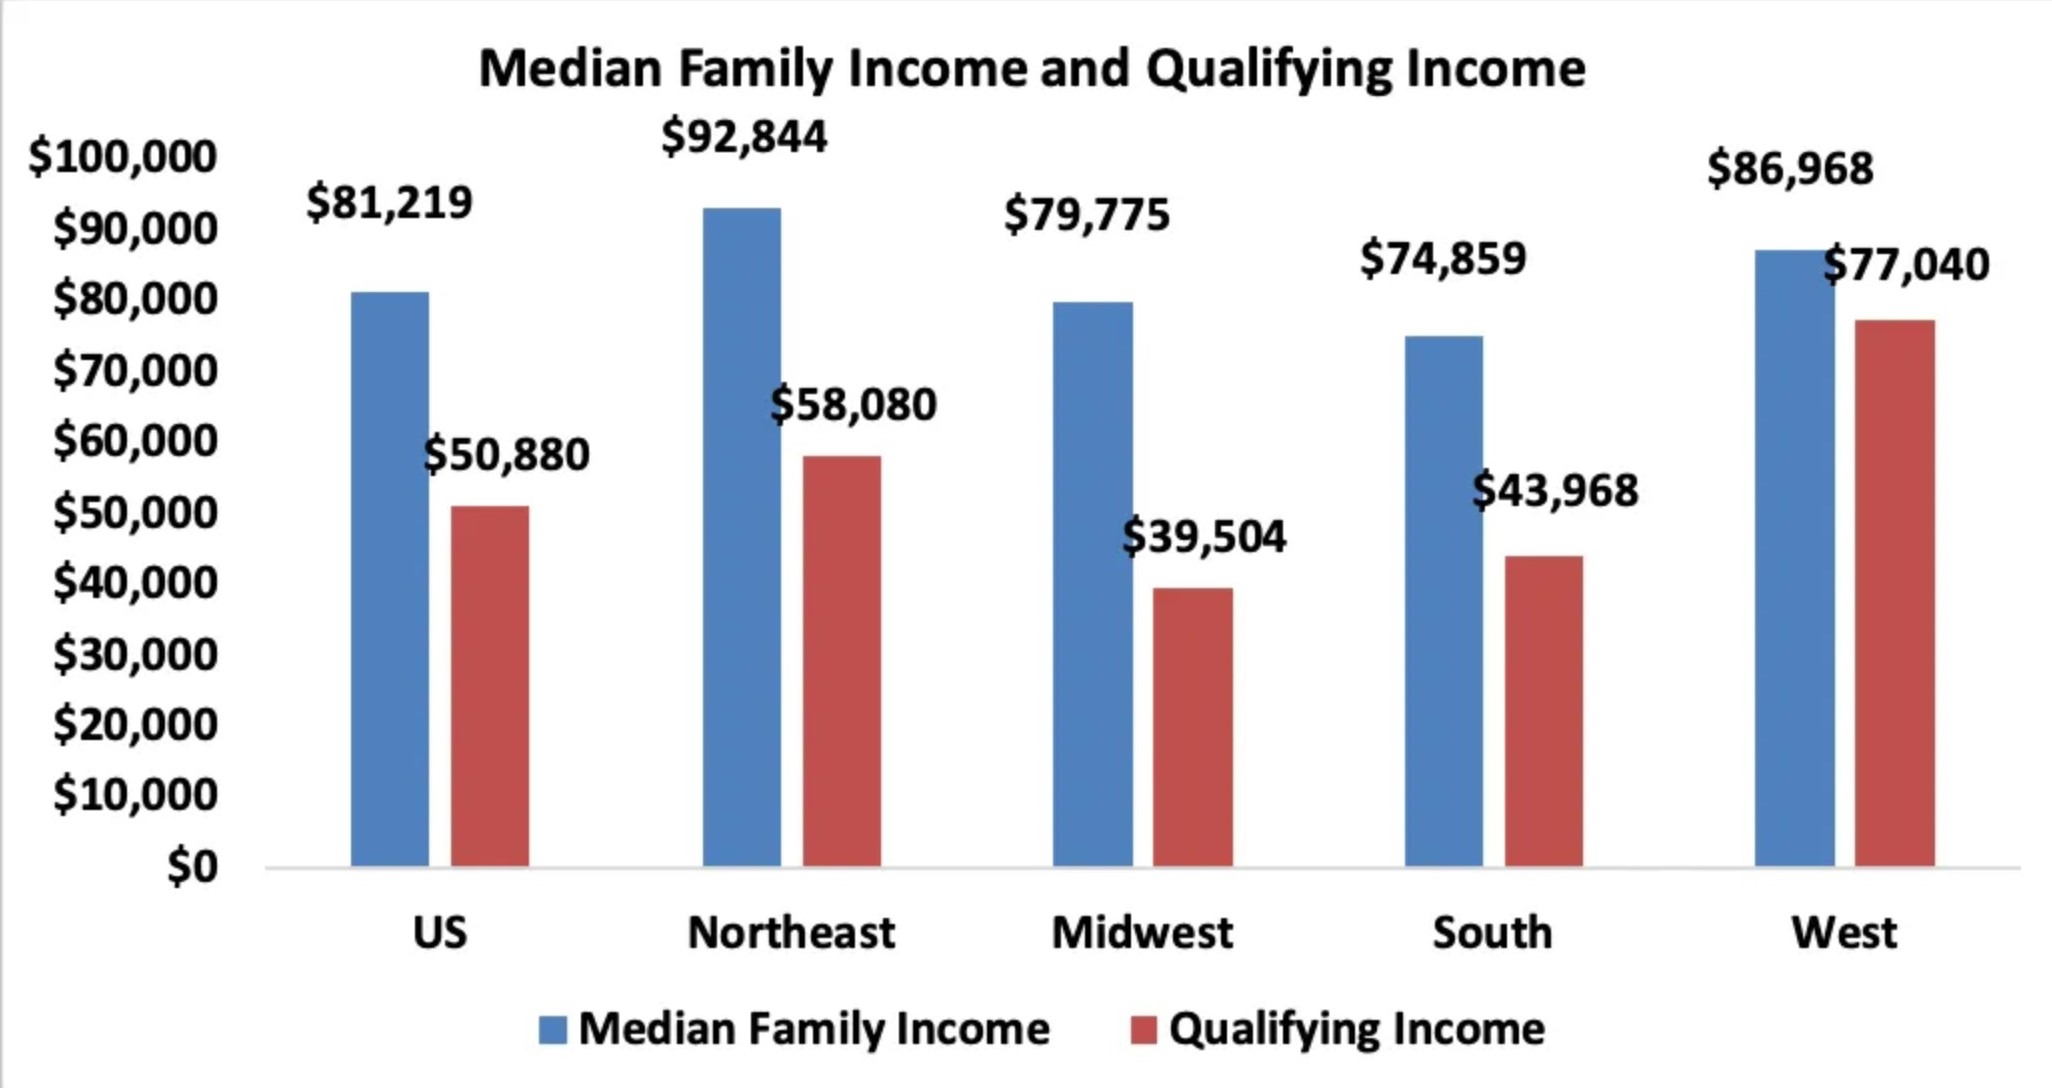 median family income